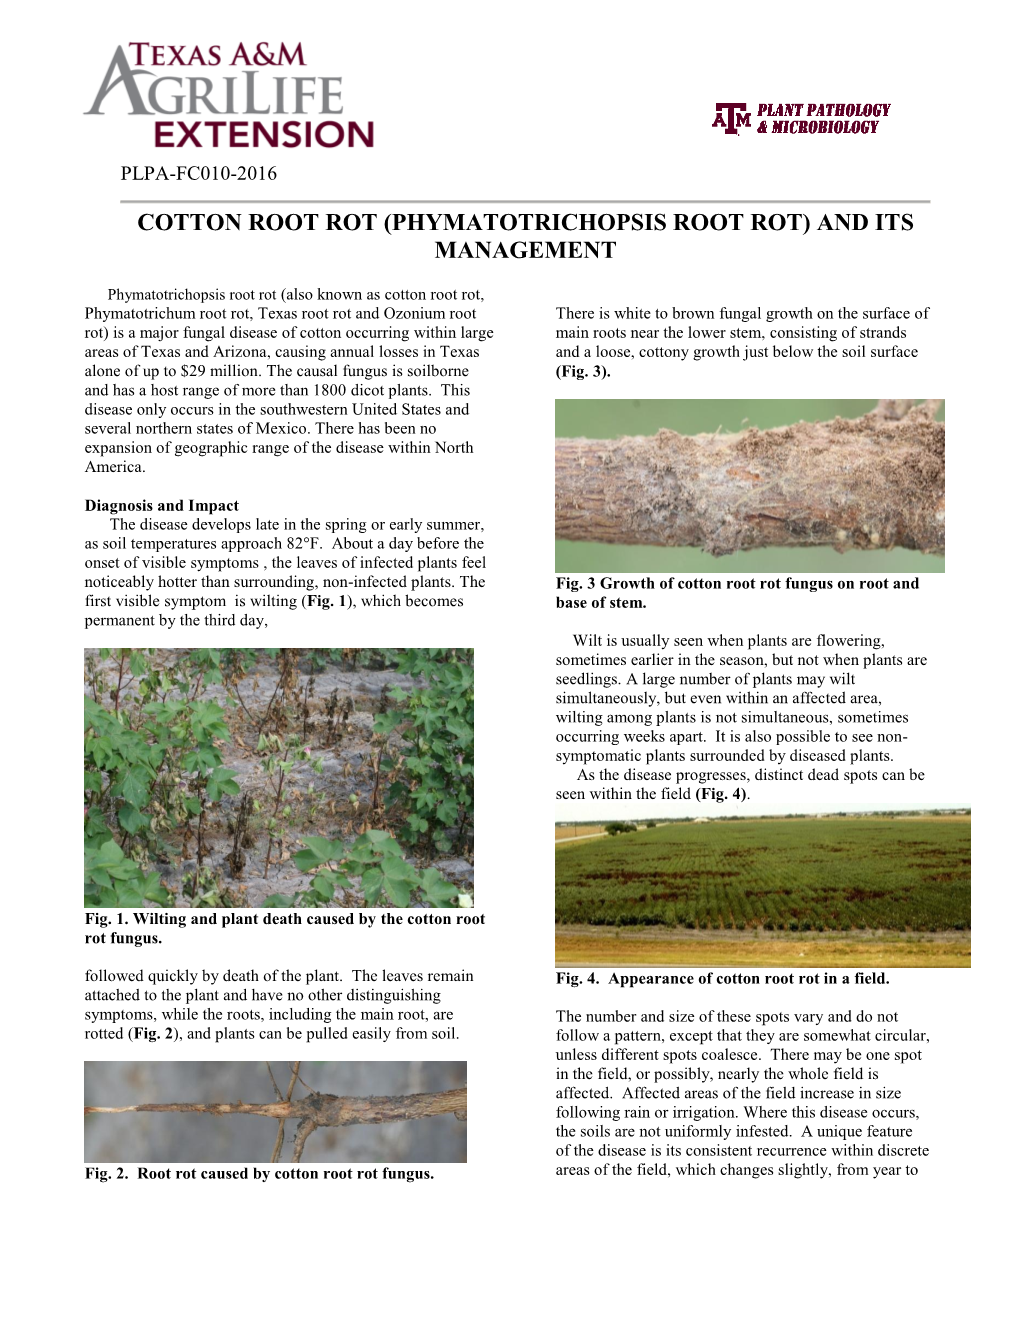 Cotton Root Rot (Phymatotrichopsis Root Rot) and Its Management